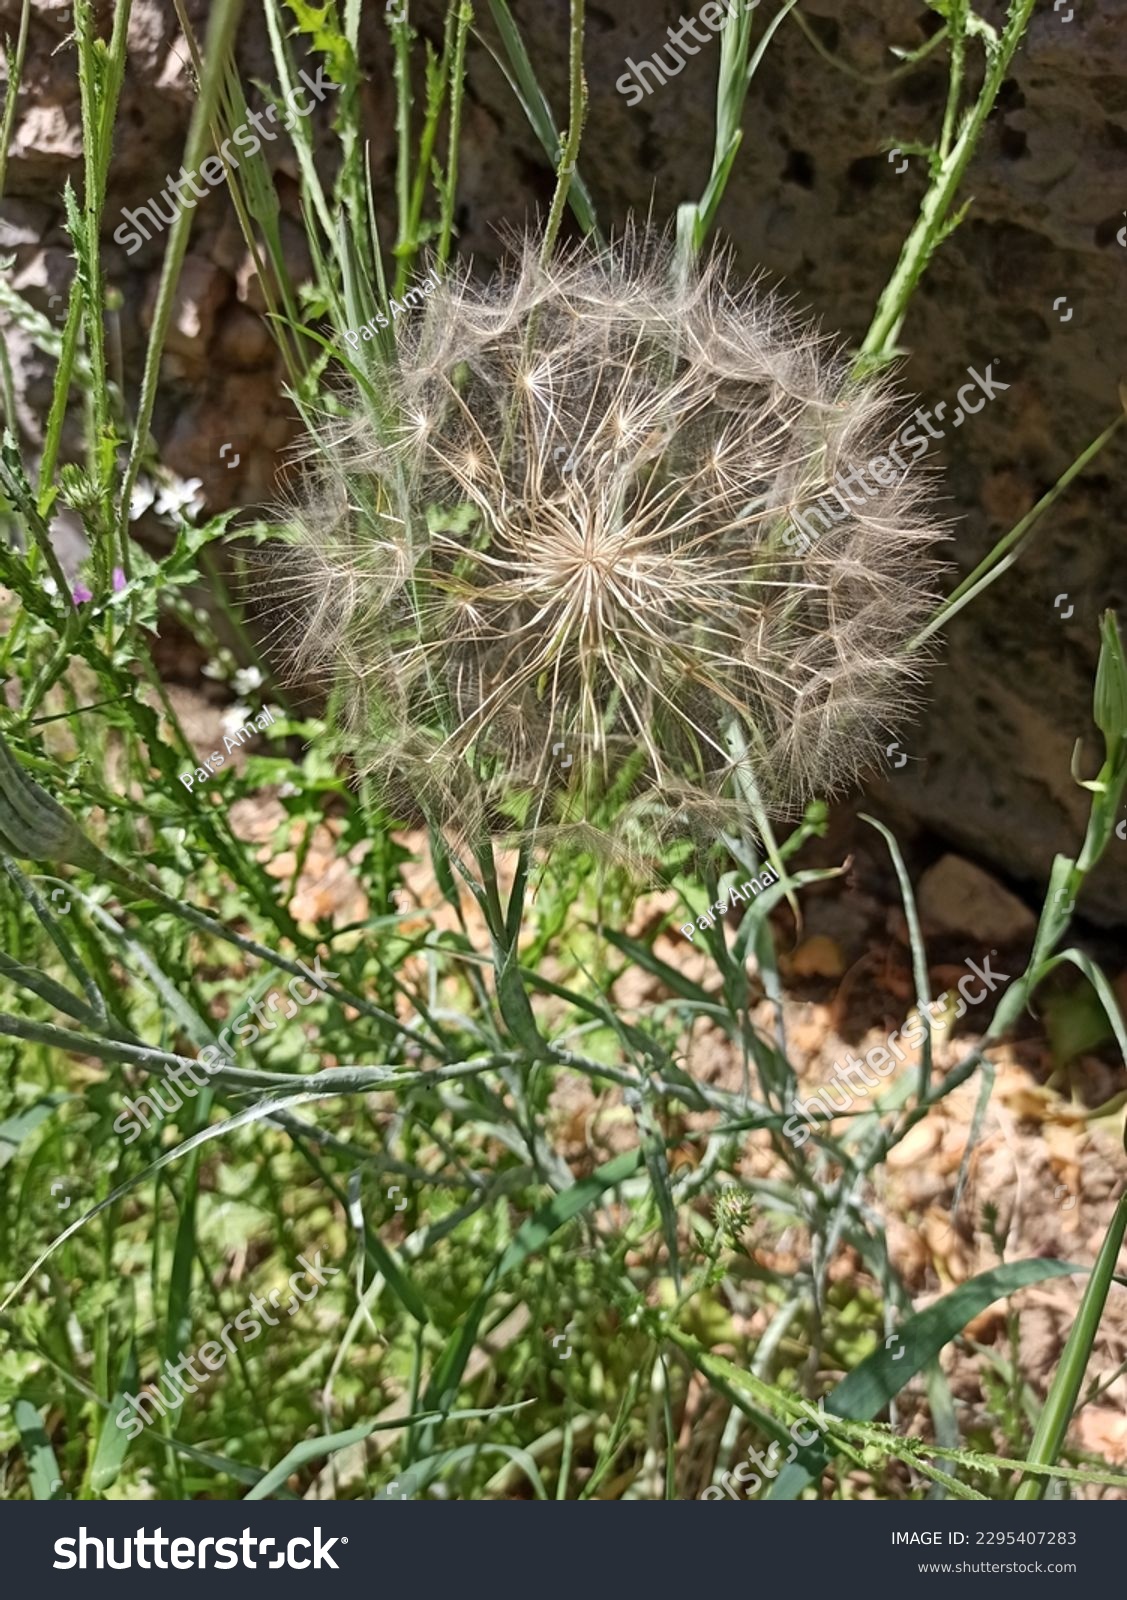 Dicots, salsifies, Tragopogon, Cichorieae, Cichorioideae, Asteraceae, Asterales, Asterids, Eudicots, Flowering plants, Vascular plants, Plants, Tragopogon porrifolius, Asteraceae, Asterales, eudicots #2295407283